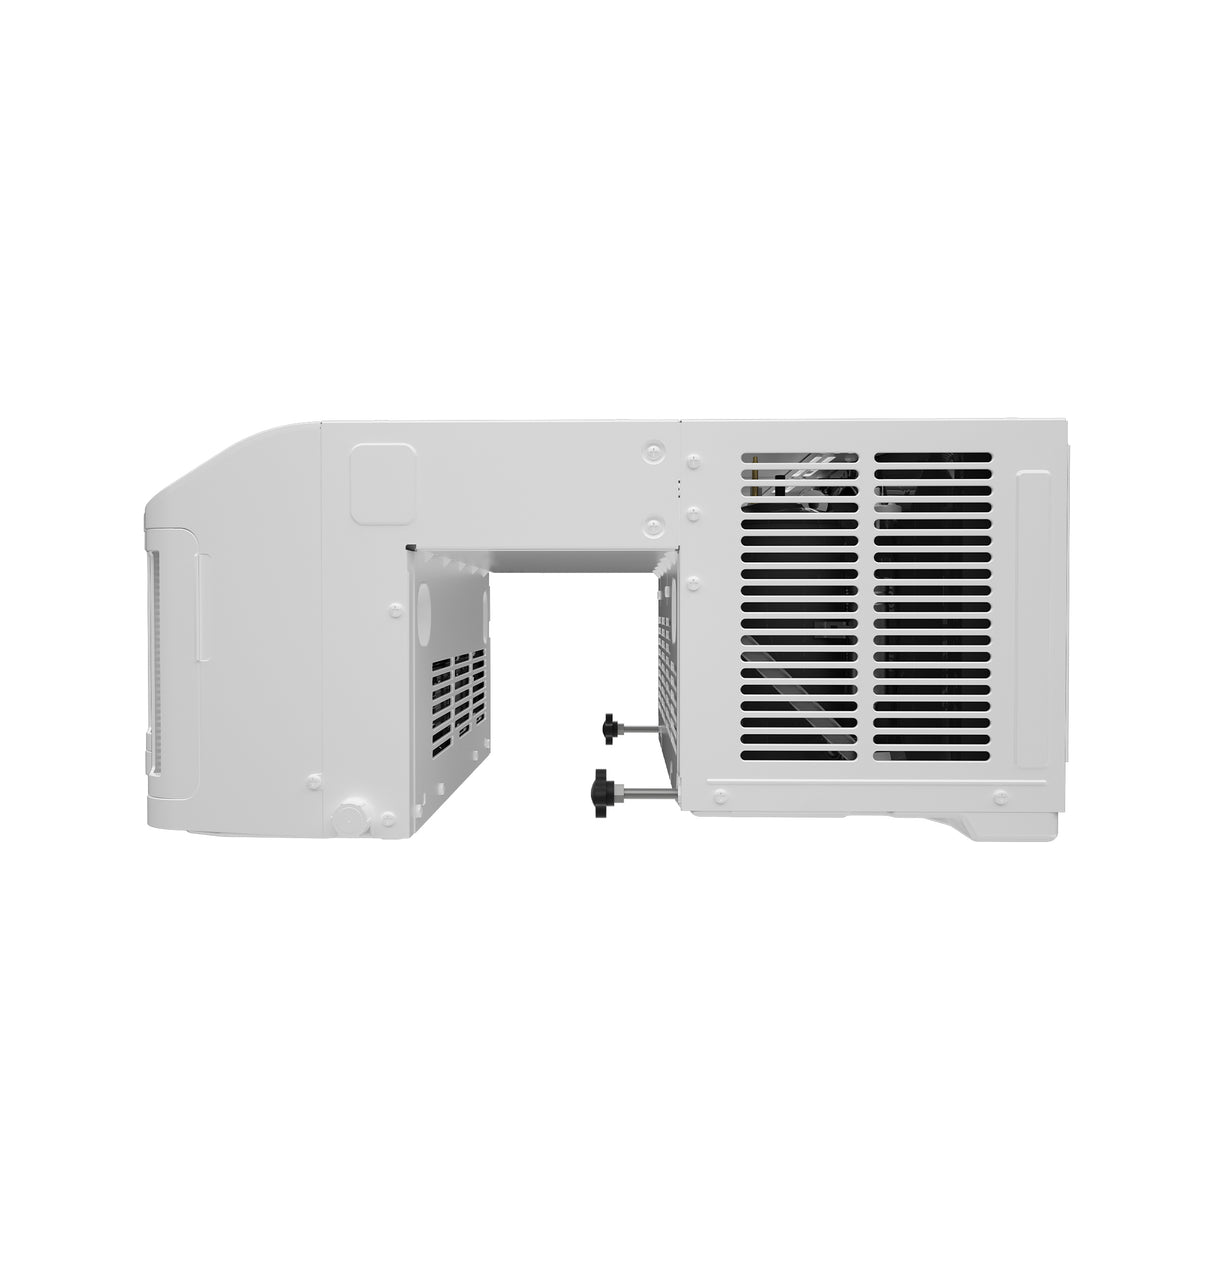 GE Profile ClearView(TM) 6,100 BTU Smart Ultra Quiet Window Air Conditioner for Small Rooms up to 250 sq. ft. - (AHTT06BC)